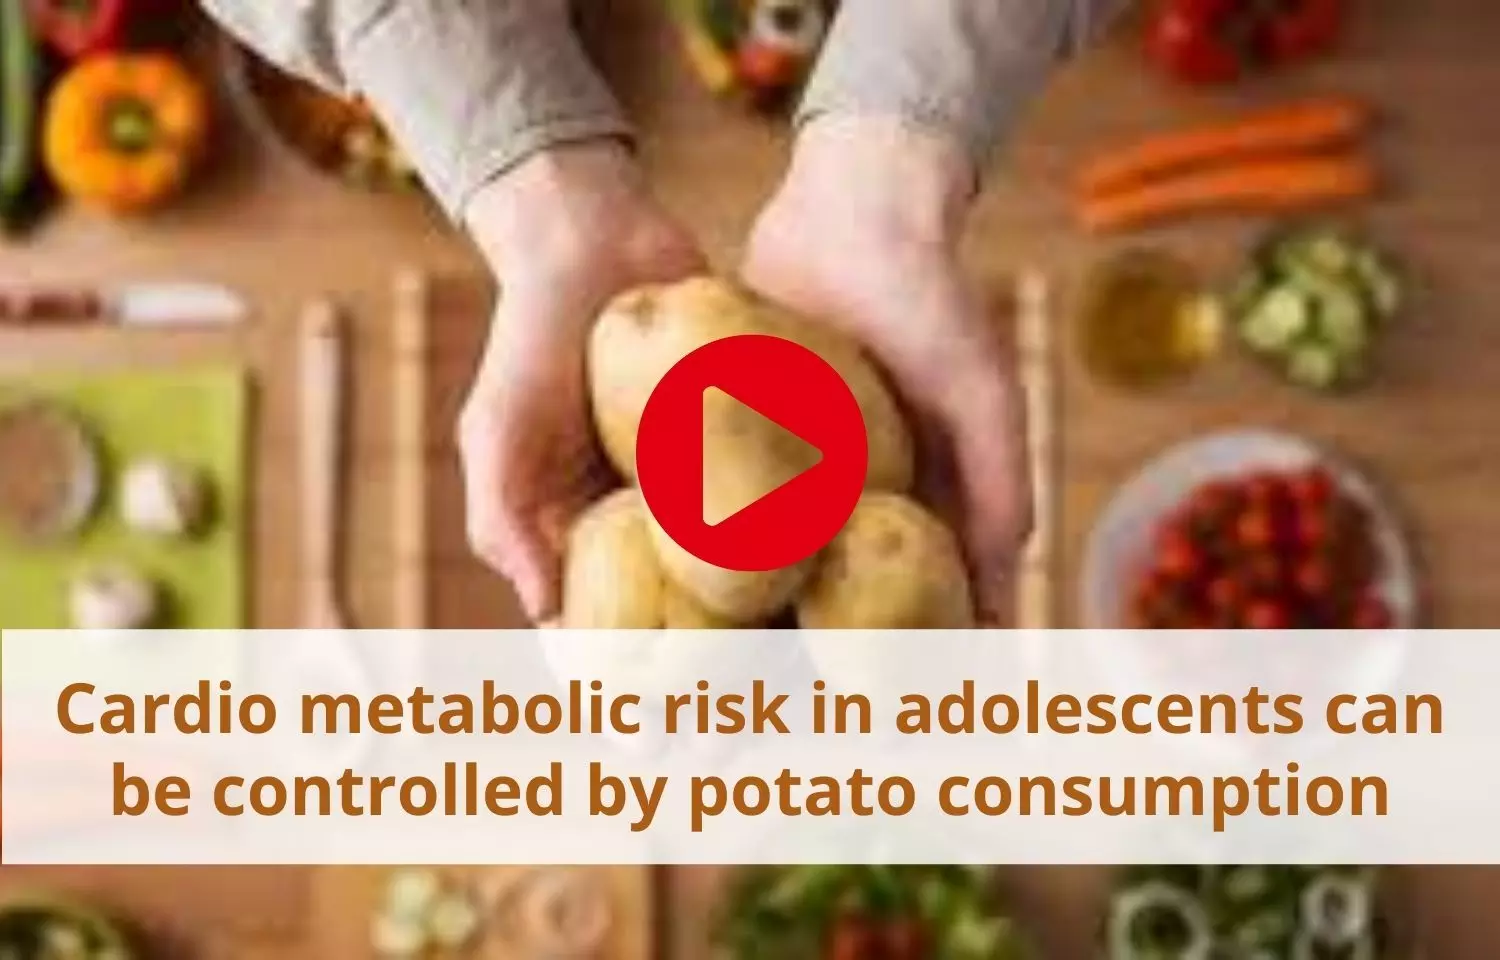 Cardiometabolic risk in adolescents can be controlled by potato consumption